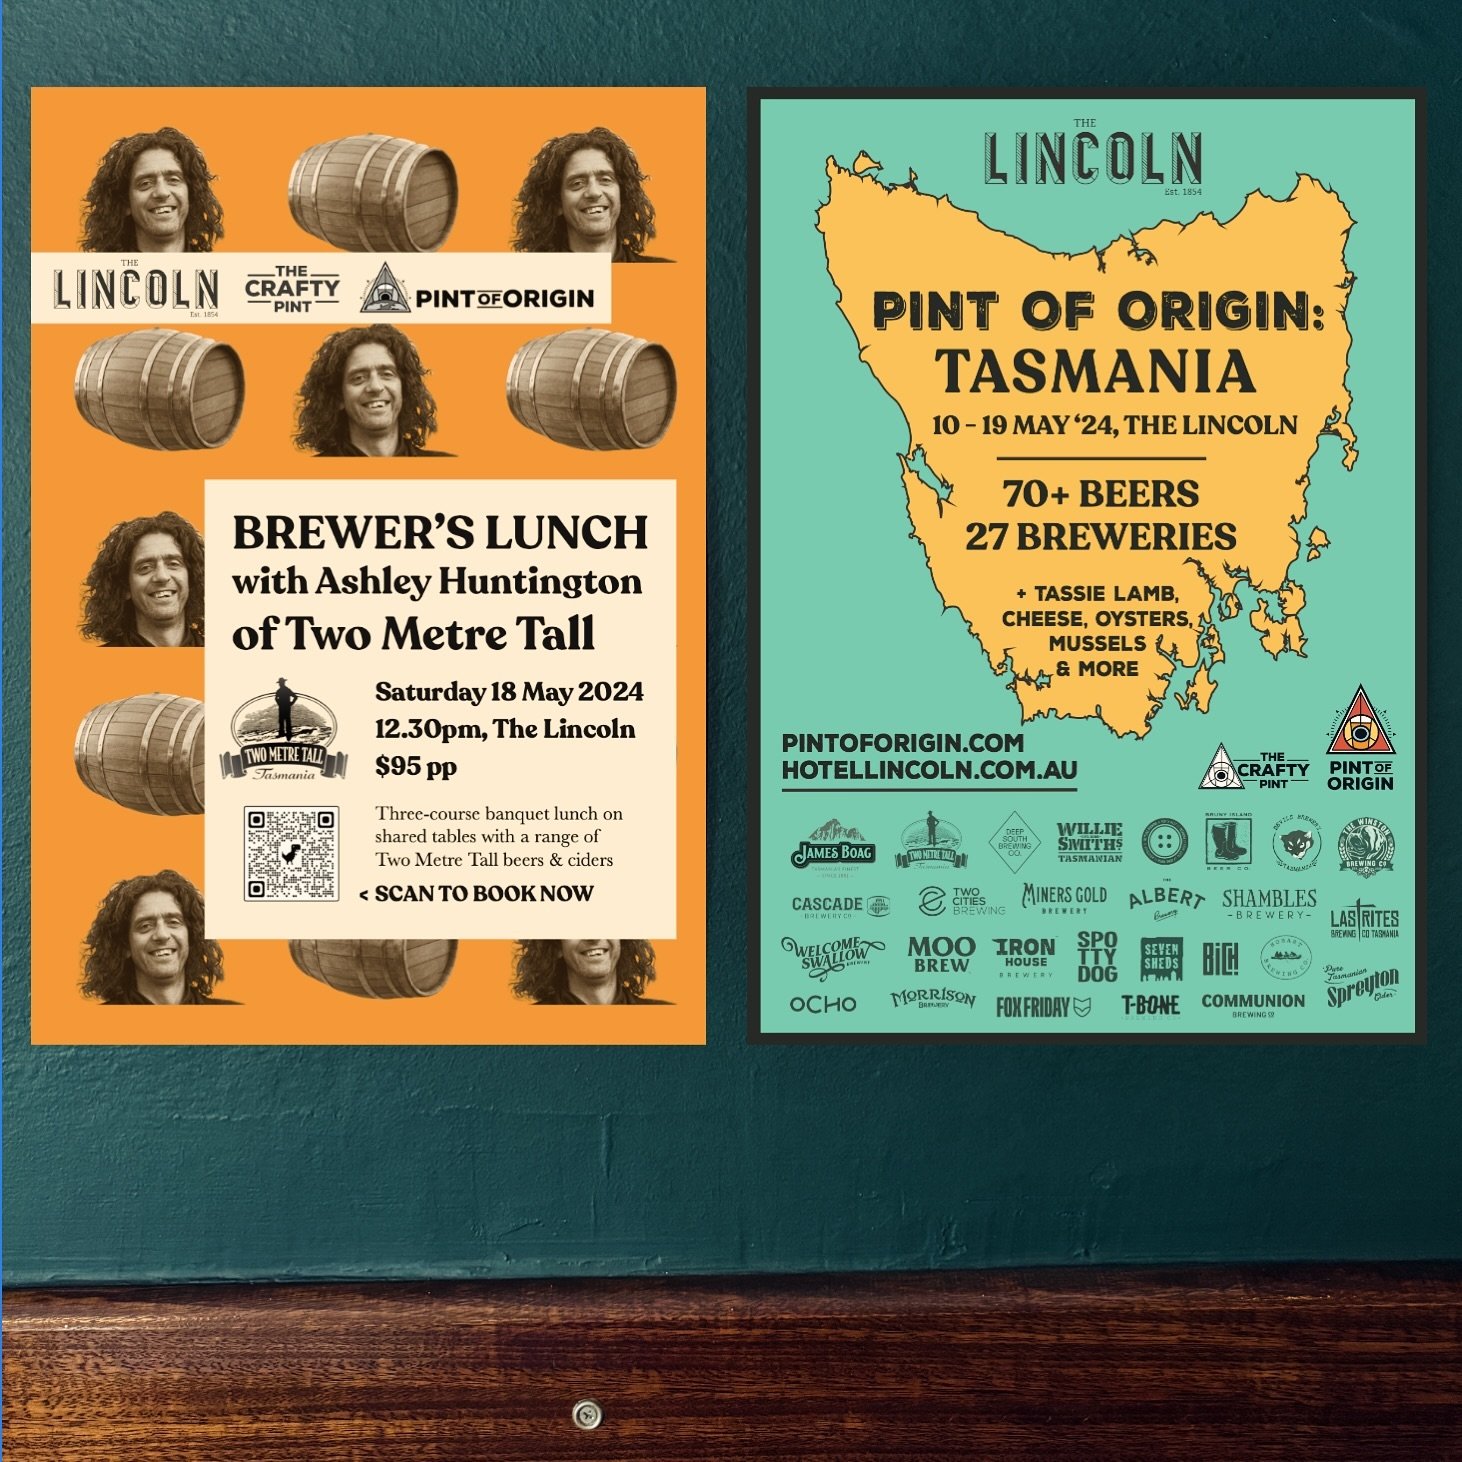 The most wonderful time of the year is nigh! 🍻 PINT OF ORIGIN kicks off this Friday and we&rsquo;re doing the BIGGEST one yet!

70+ beers have crossed the Bass Strait, drawn from 27 breweries. There&rsquo;s a reason TASMANIA has one of the most exci